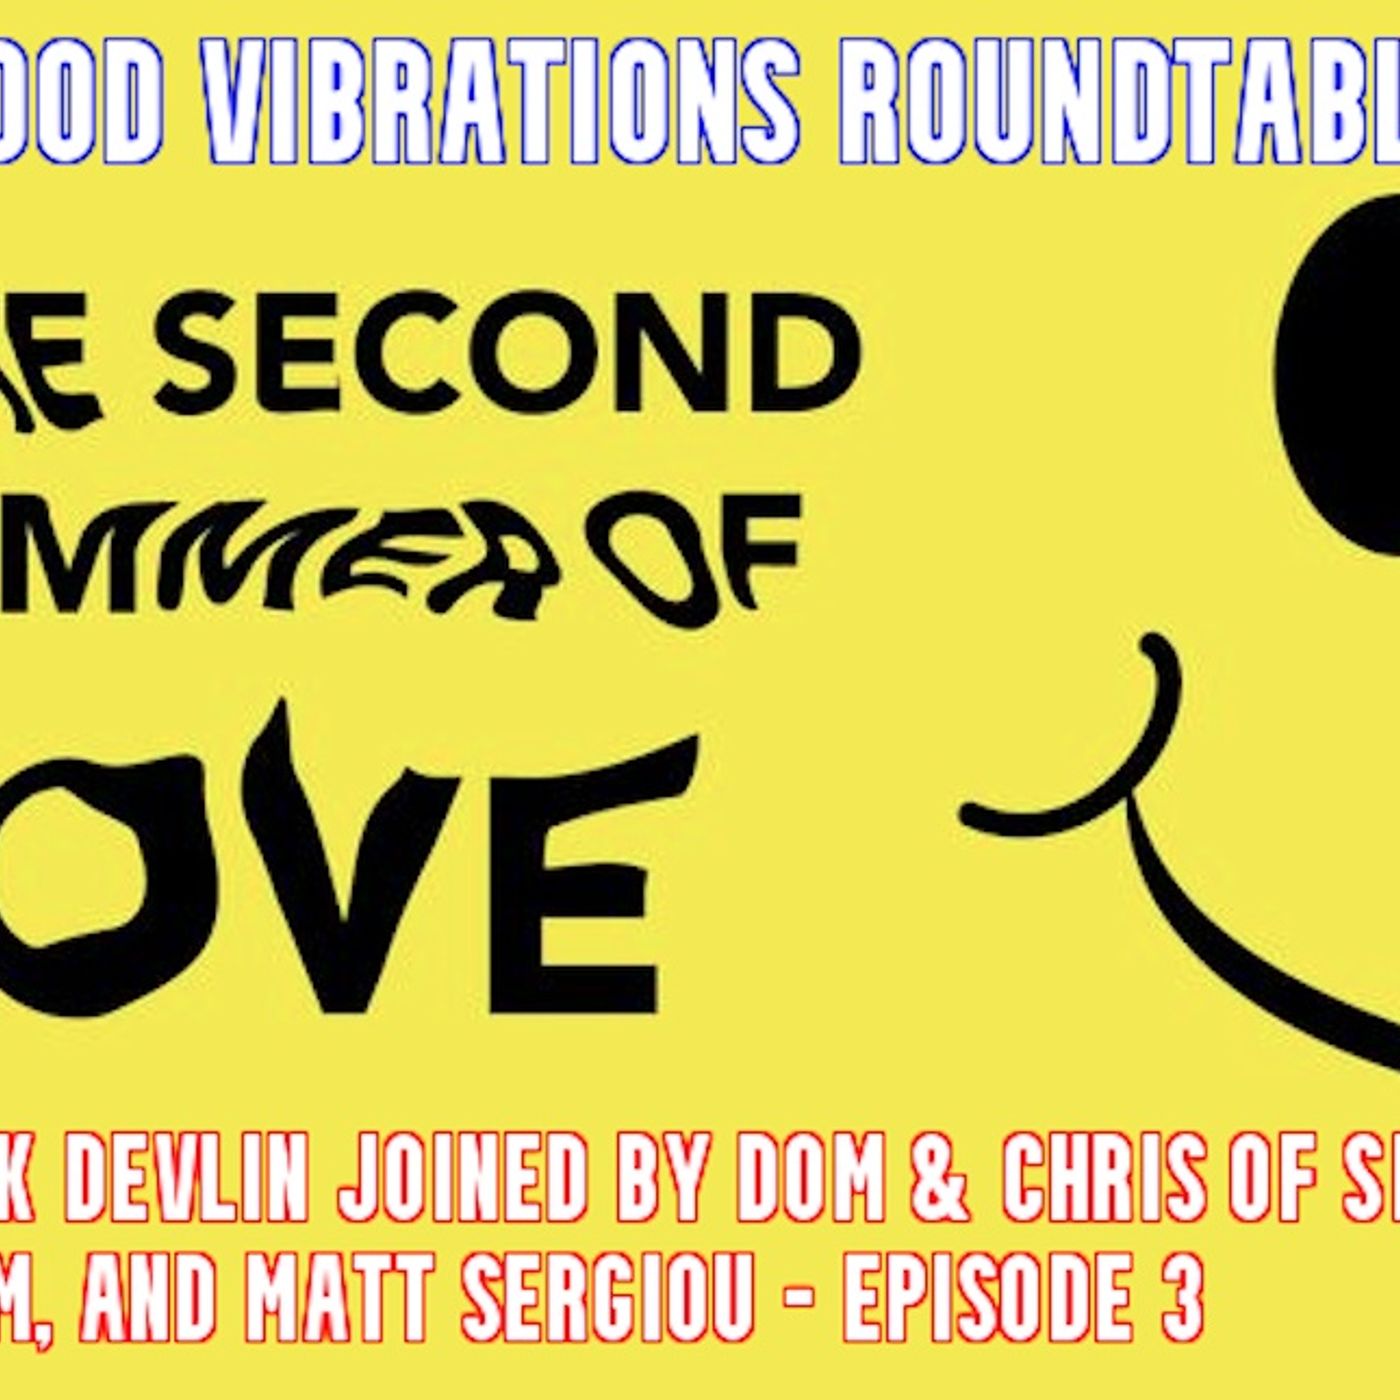 Good Vibrations Podcast: Second Summer of Love Roundtable - Episode 3